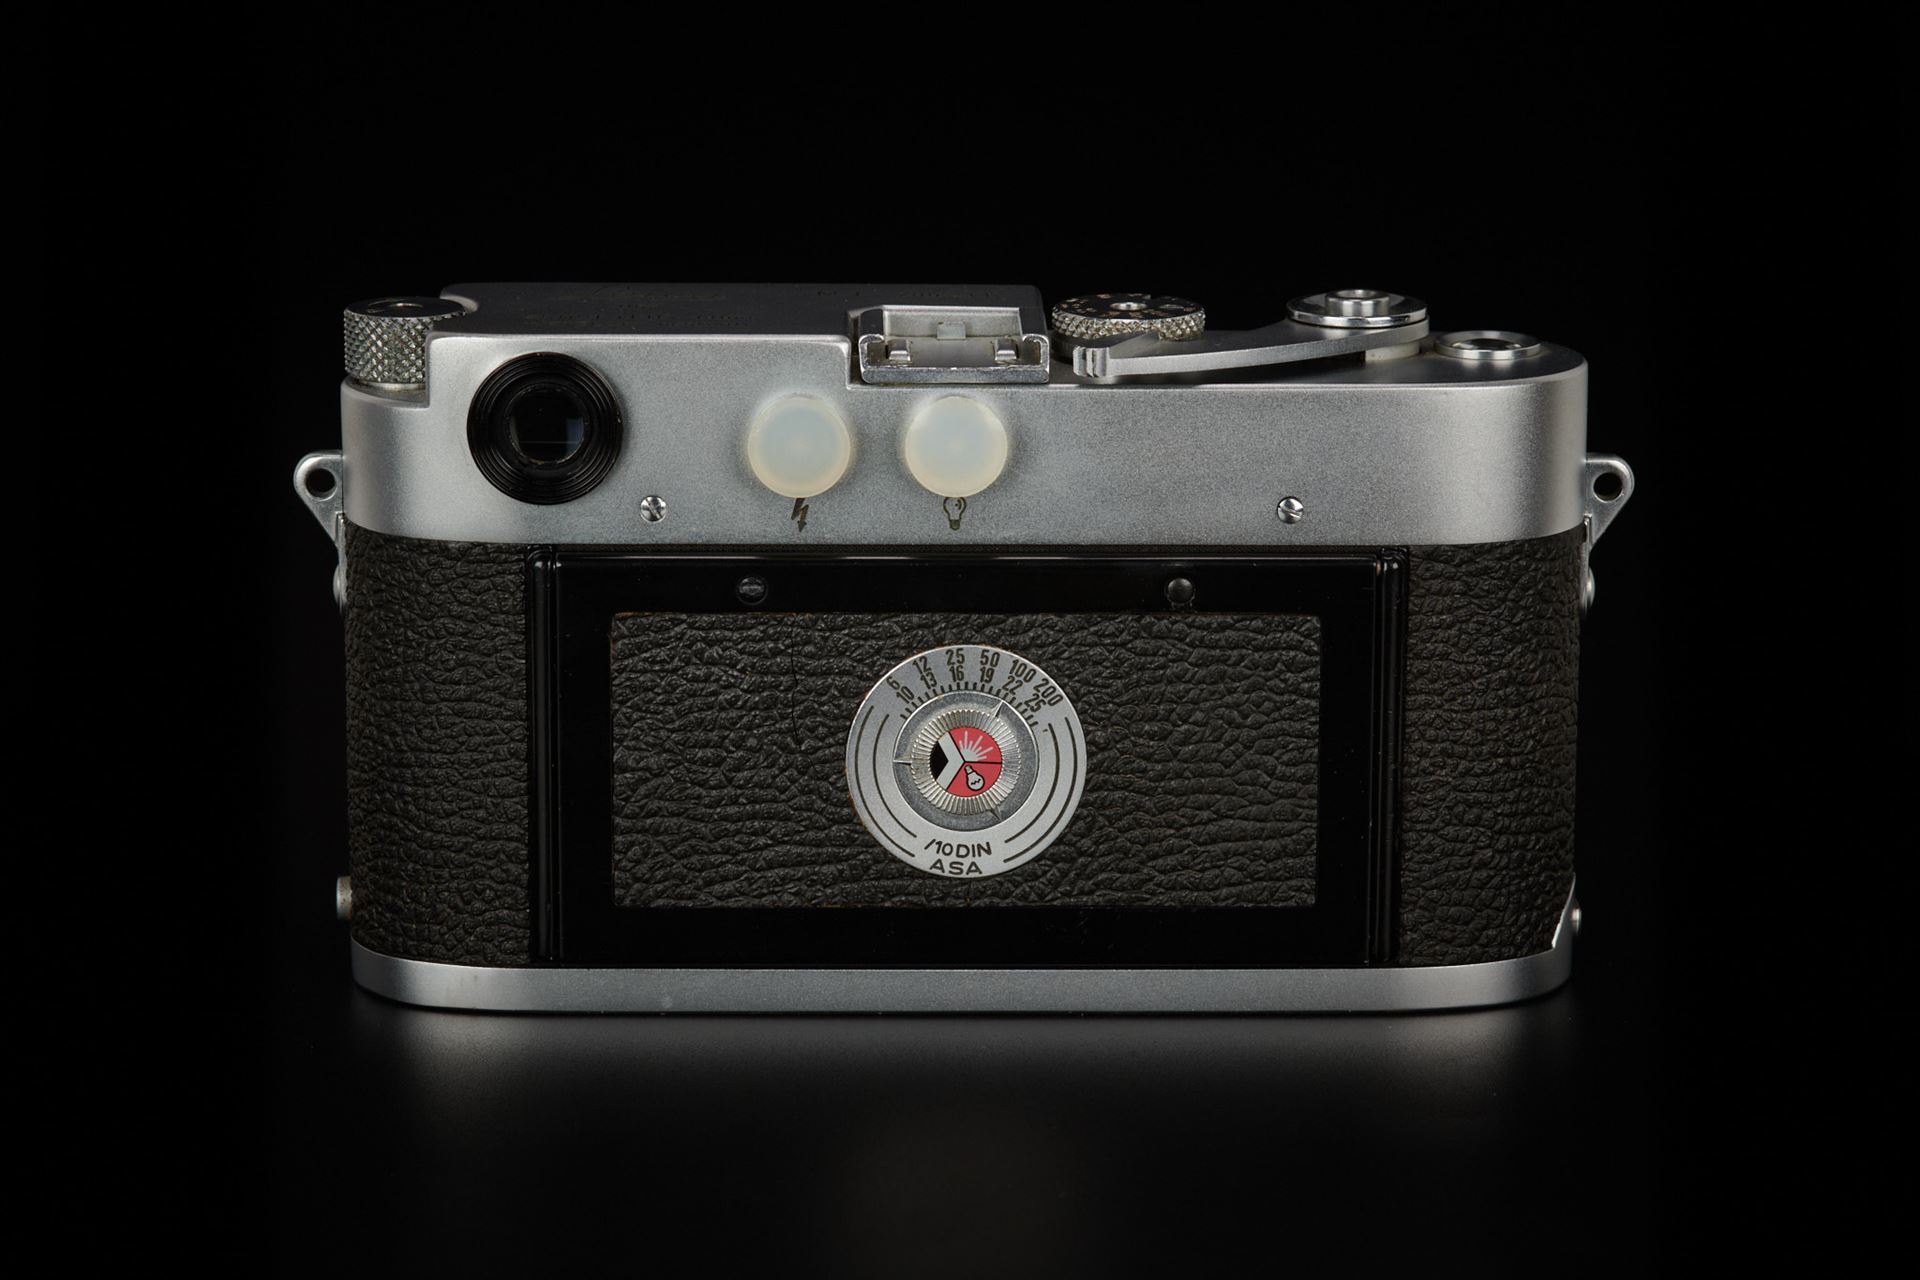 Picture of leica m3 early batch silver